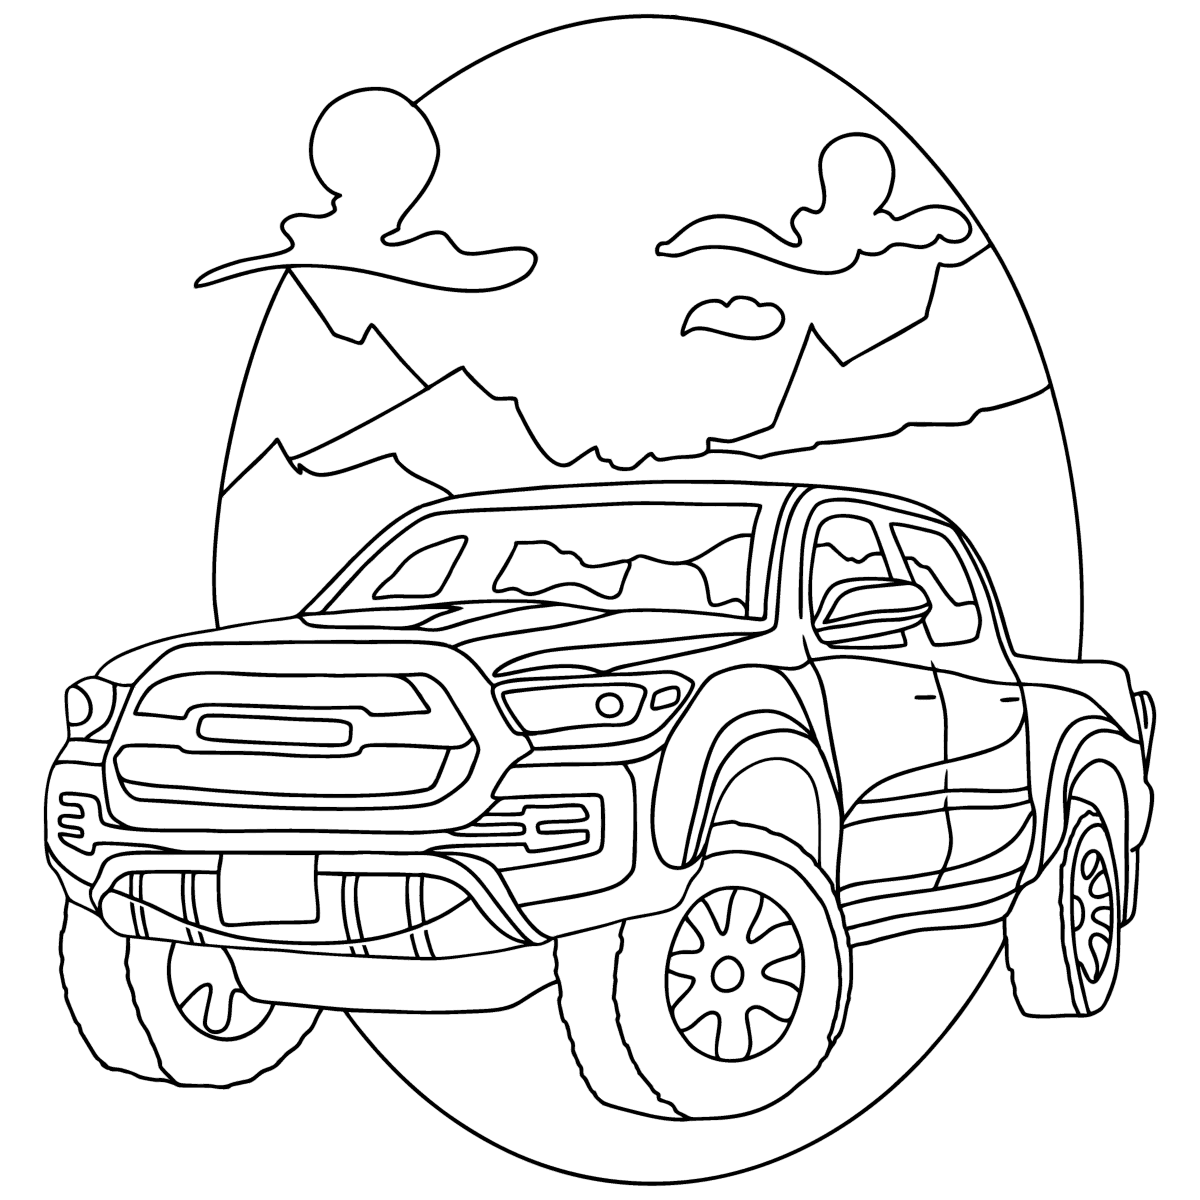 Pickup - Cars coloring pages for Adults online and printable